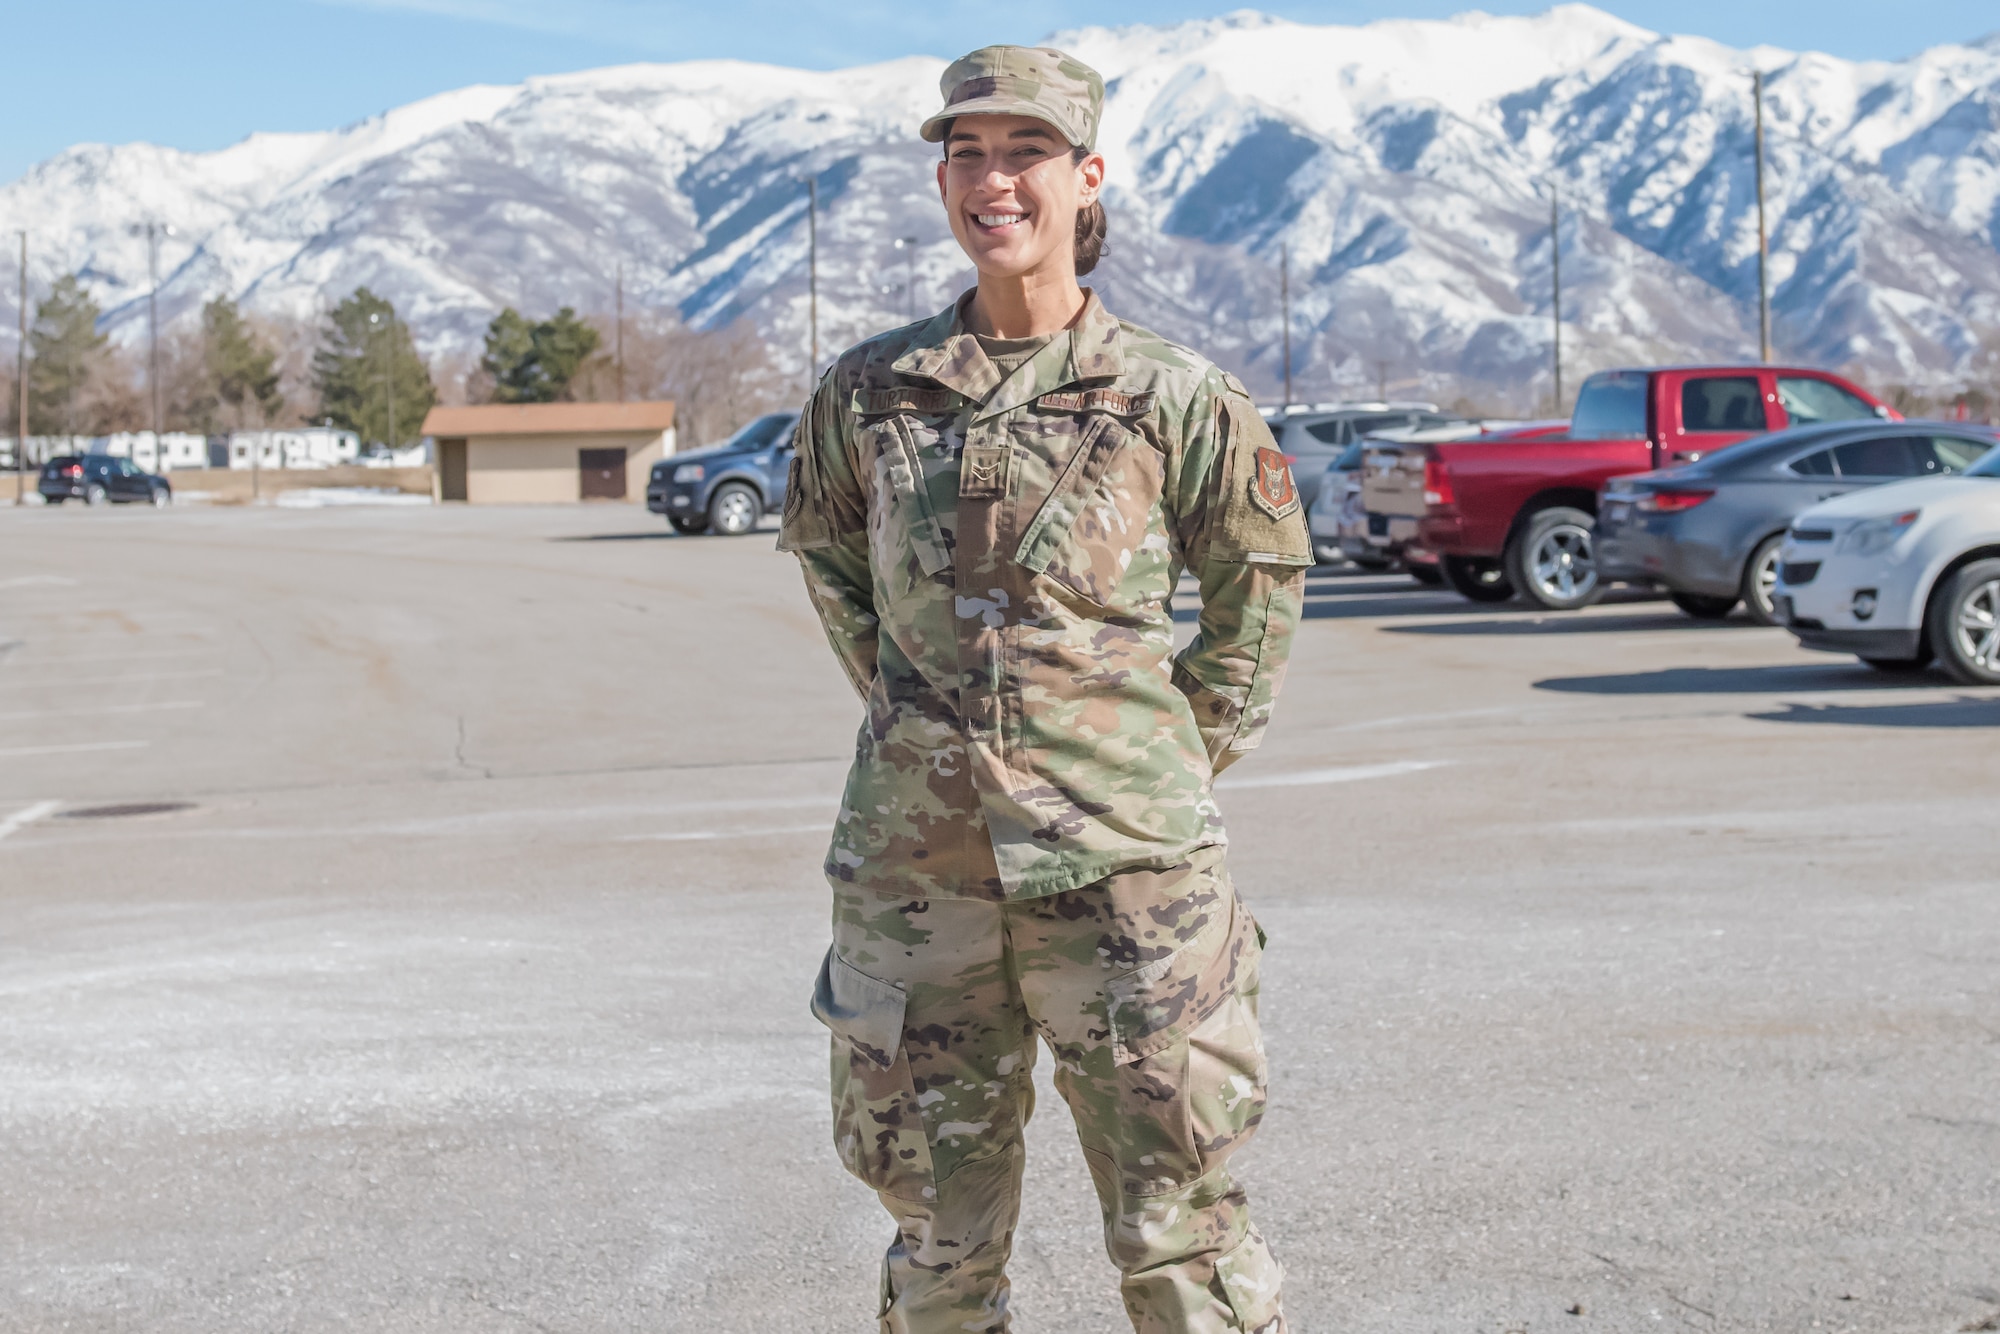 Airman 1st Class Kristie Turturro, medical administrator in the 419th Medical Squadron, poses in front of her office, Feb. 7, 2021, at Hill Air Force Base, Utah.